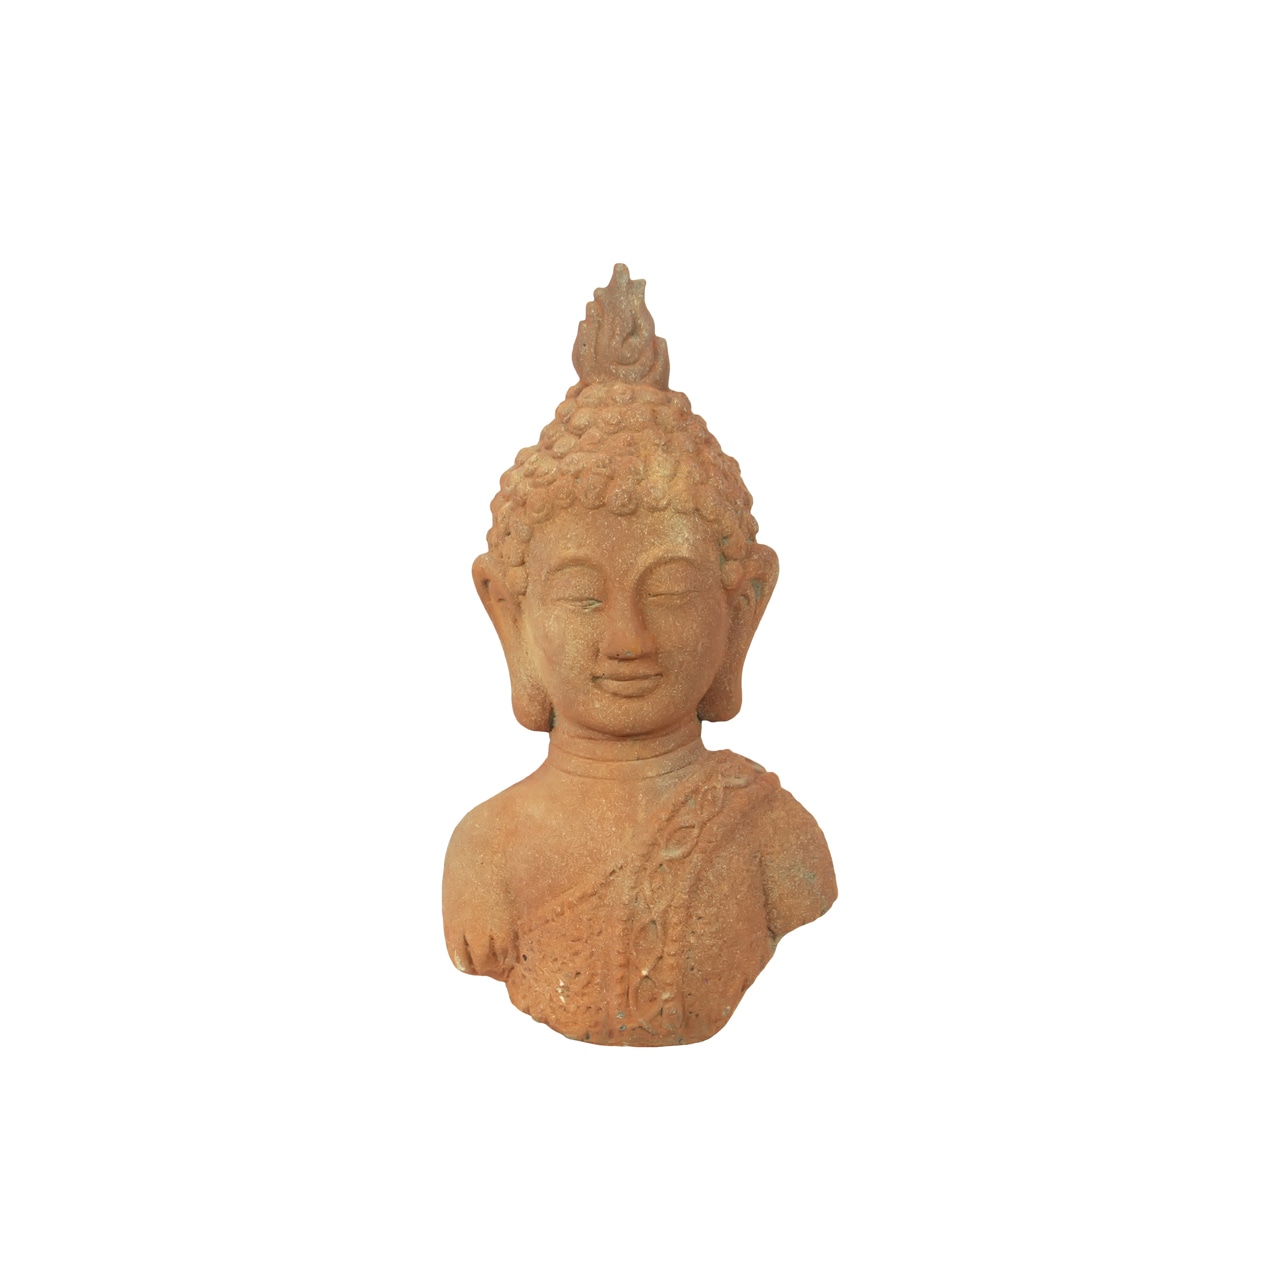 Urban Trends Collection Stone Buddha Head (StoneFinish RustDimensions 13 inches high x 4.5 inches wide x 6 inches deepFor Decorative Purposes OnlyDoes Not Hold Water)